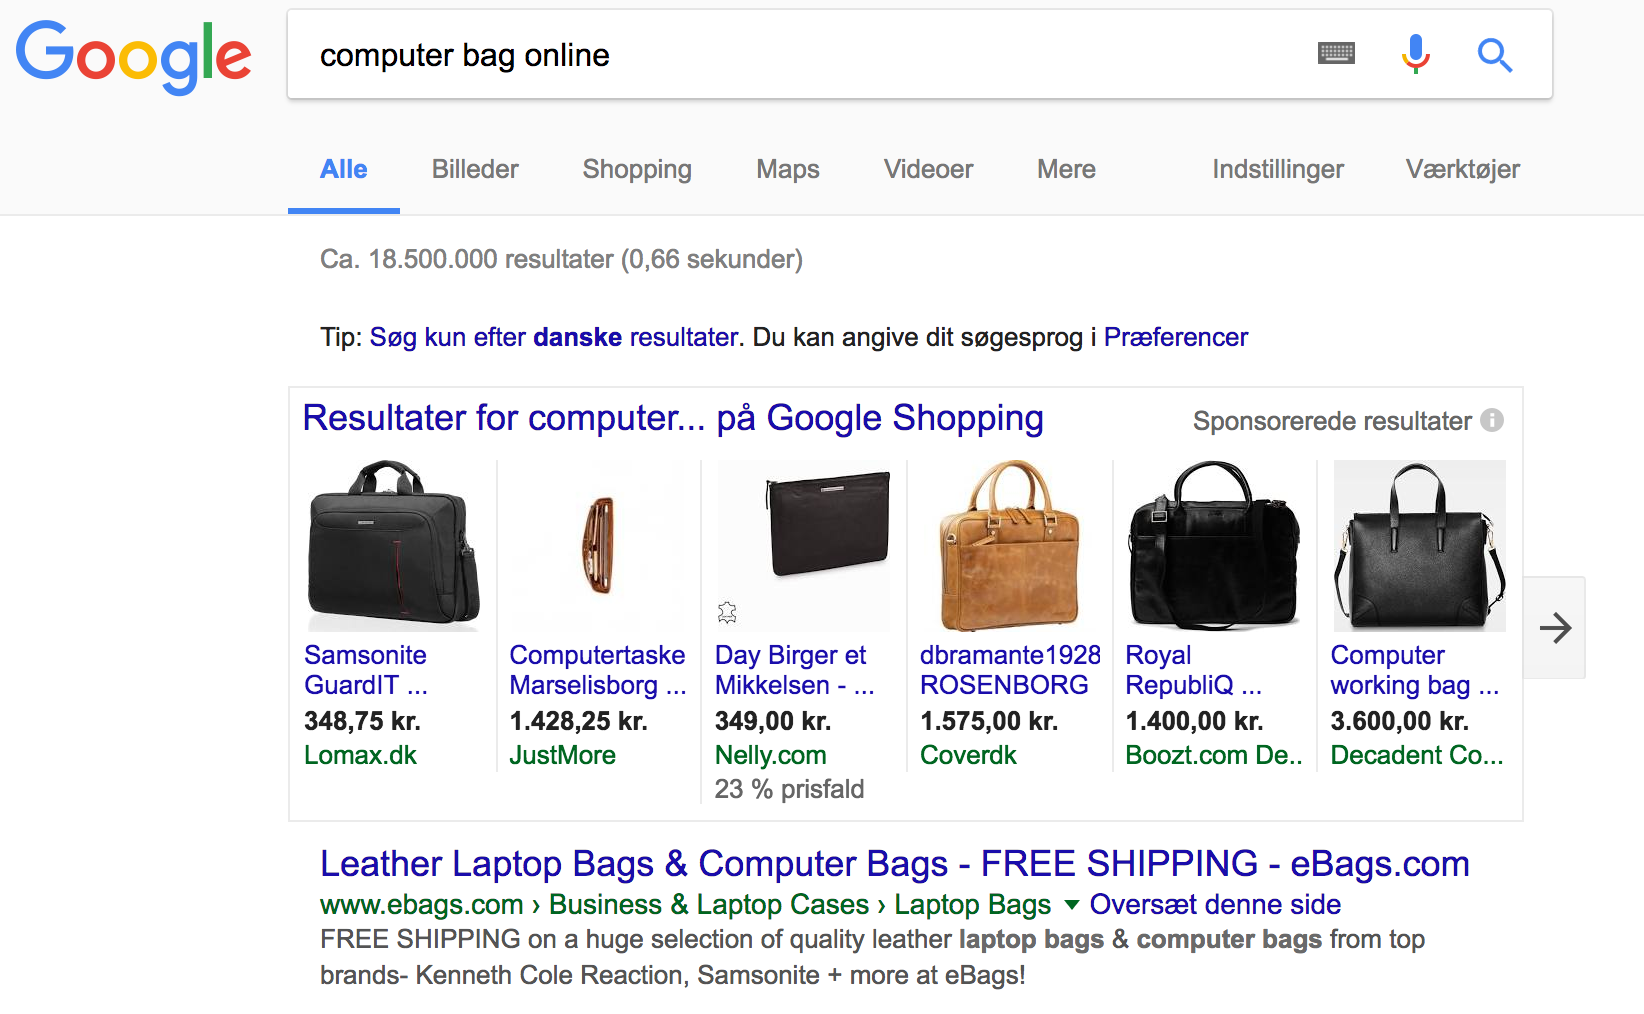 Google Shopping: Computer bags online-resultater